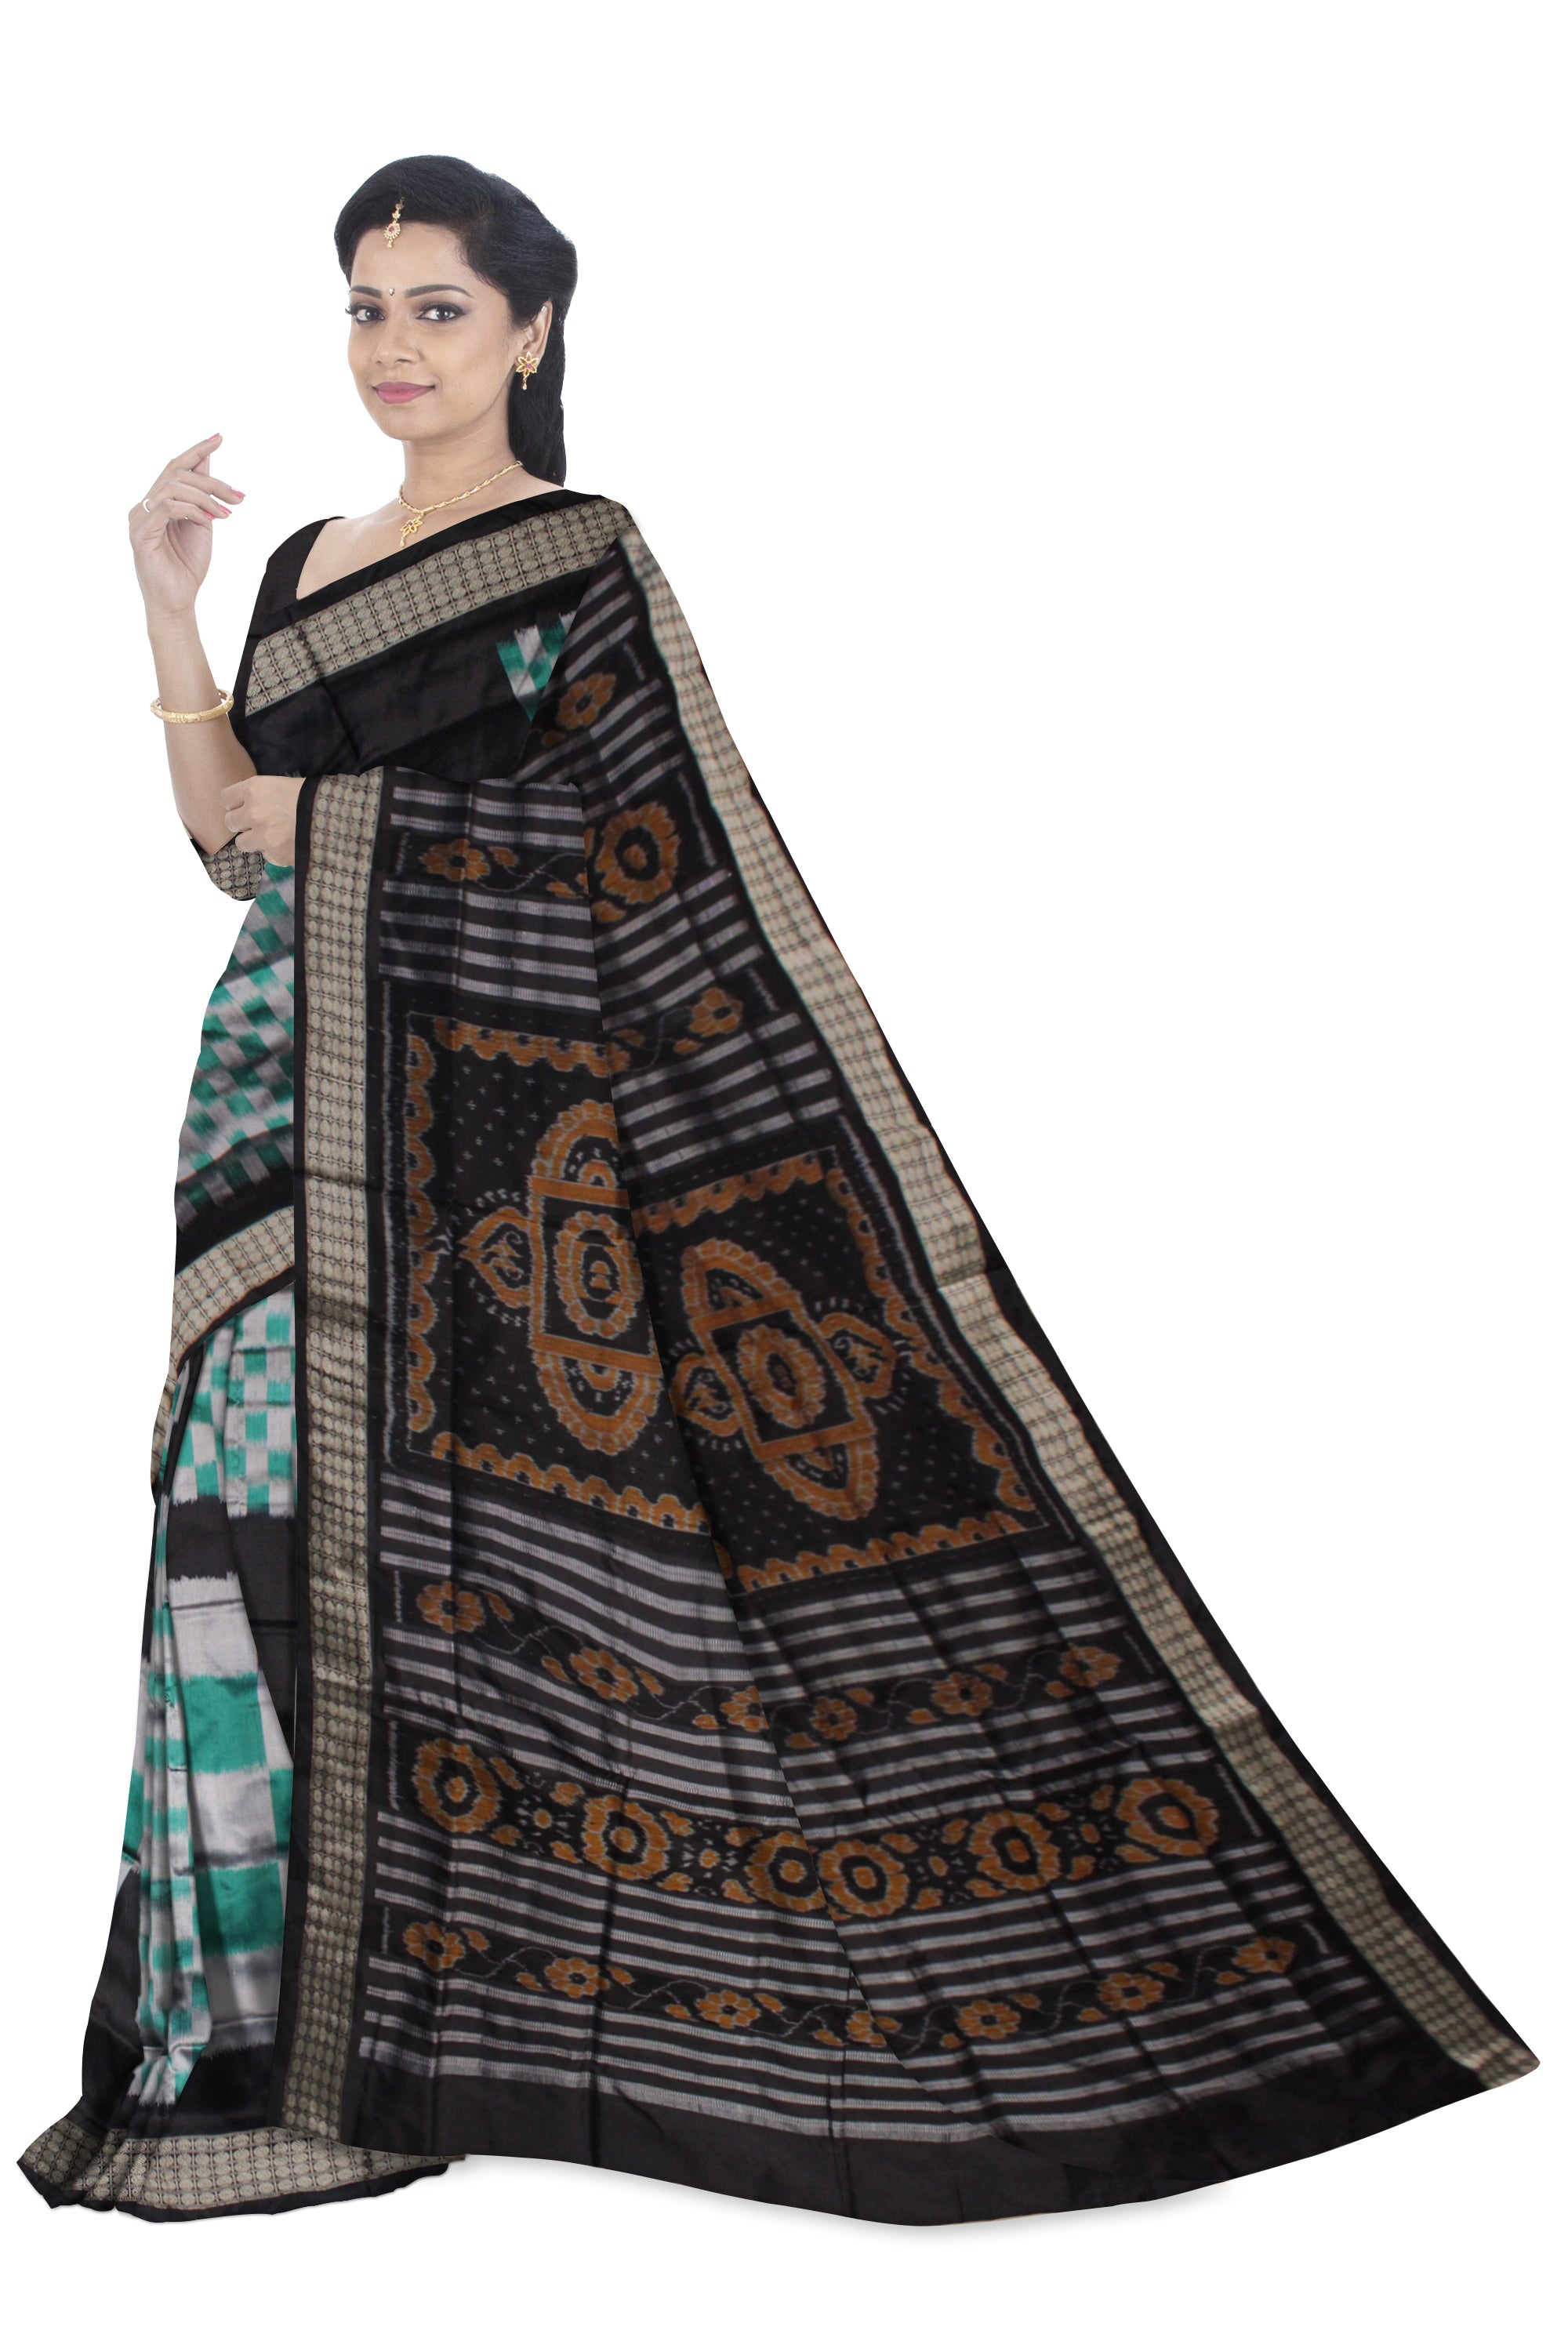 TURQUOISE AND BLACK COLOR BIG PASAPALI PATTERN PATA SAREE,ATTACHED WITH MATCHING BLOUSE PIECE. - Koshali Arts & Crafts Enterprise